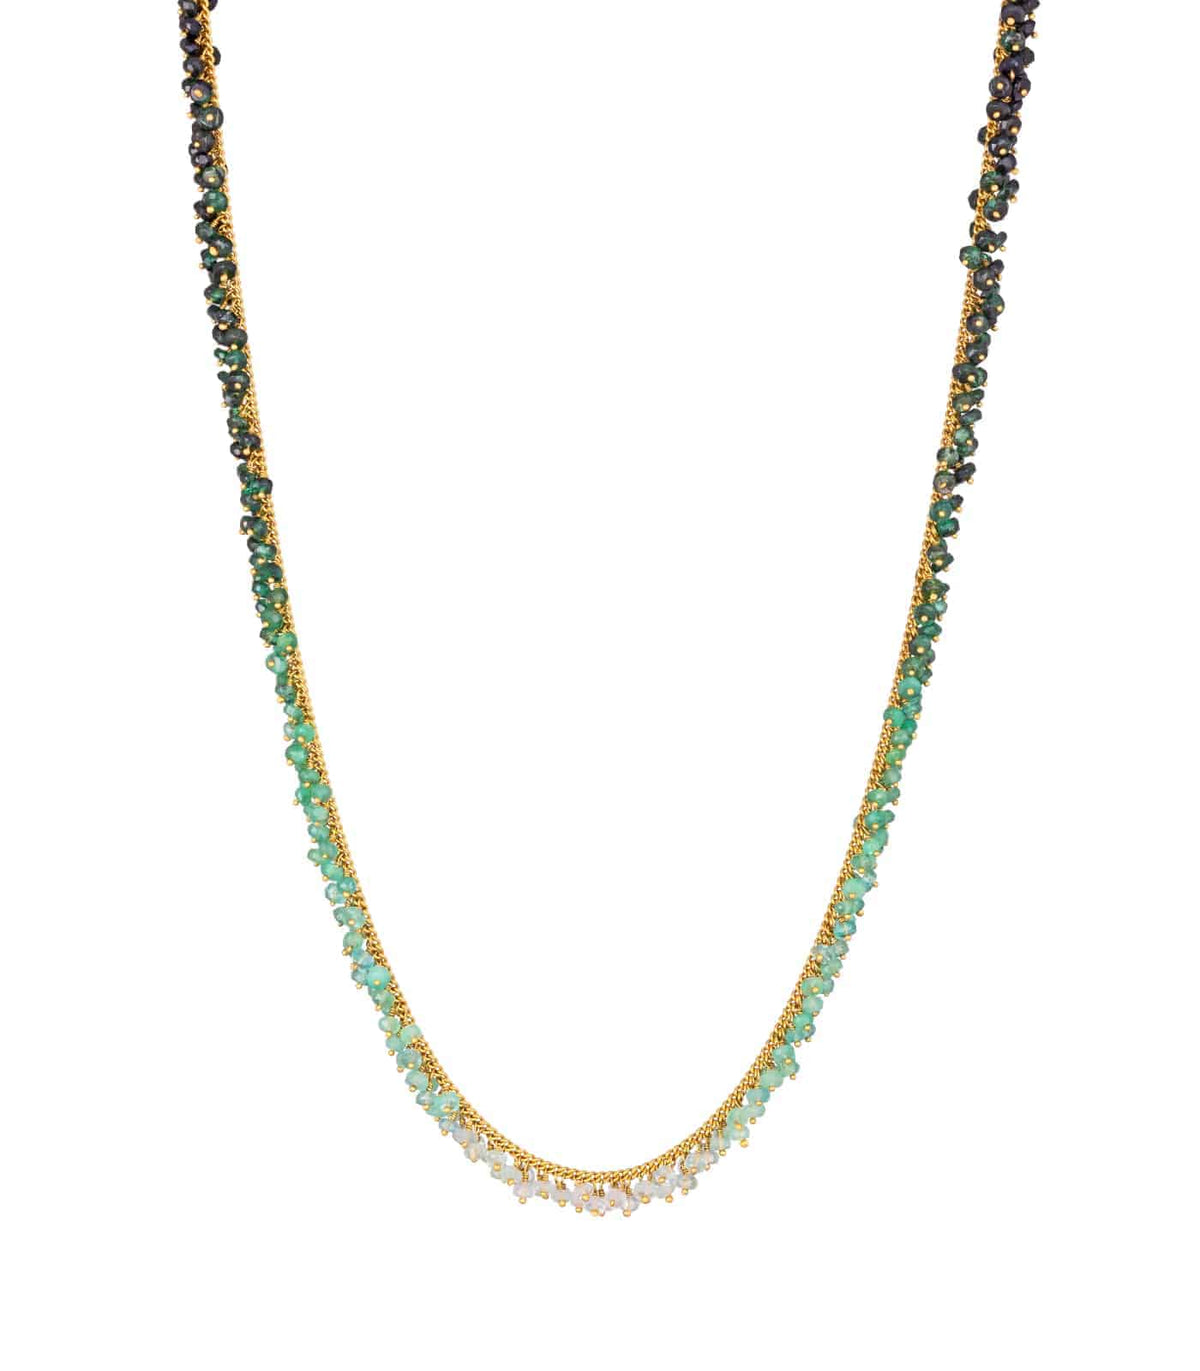 Kate Wood ‘Full Row’ Ombré Emerald Necklace